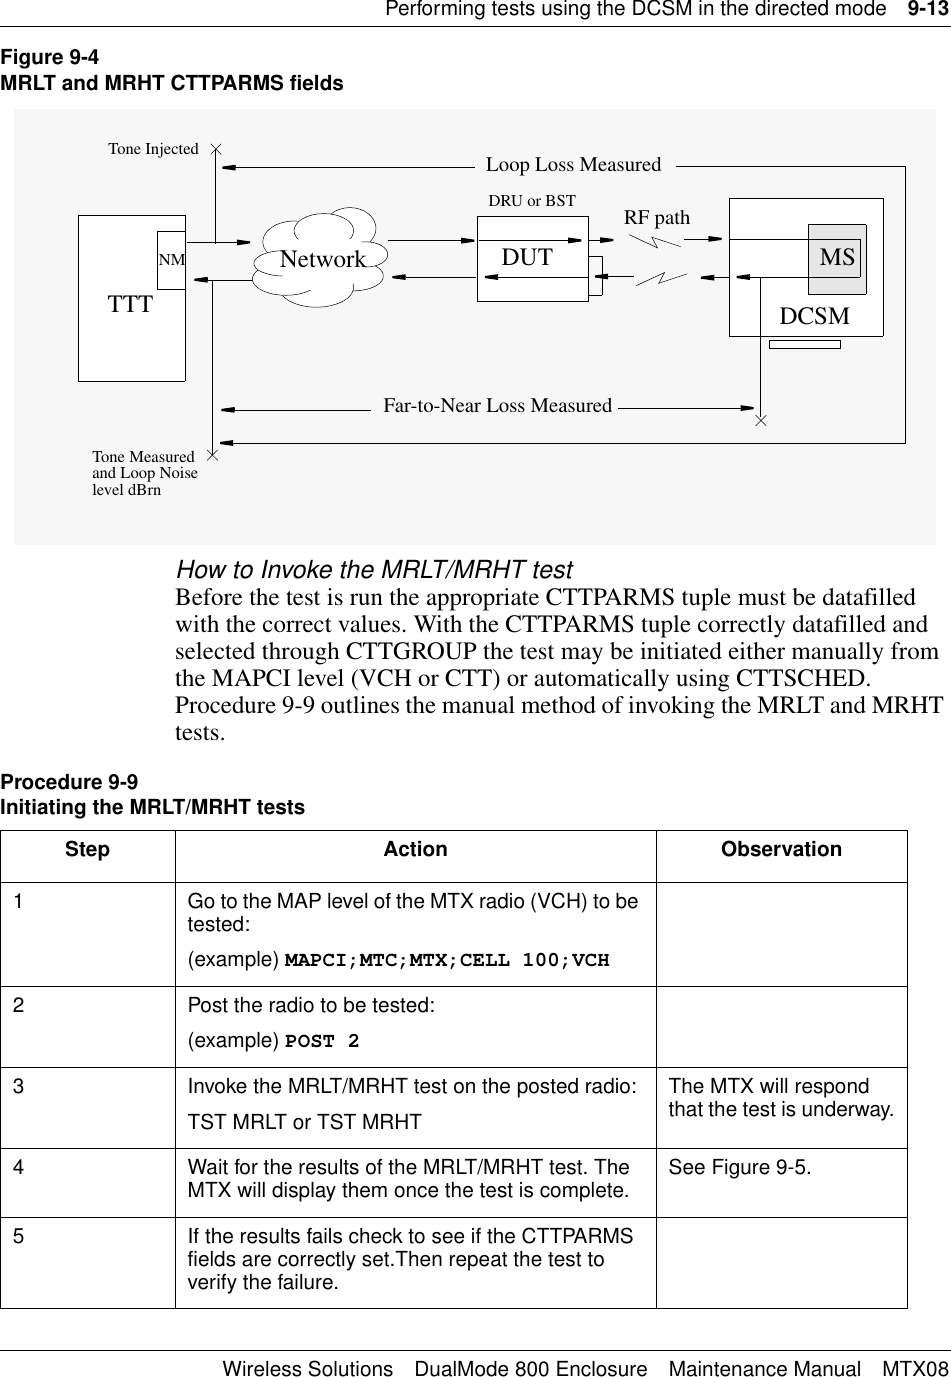 Performing tests using the DCSM in the directed mode 9-13Wireless Solutions DualMode 800 Enclosure Maintenance Manual MTX08Figure 9-4MRLT and MRHT CTTPARMS fieldsHow to Invoke the MRLT/MRHT testBefore the test is run the appropriate CTTPARMS tuple must be datafilled with the correct values. With the CTTPARMS tuple correctly datafilled and selected through CTTGROUP the test may be initiated either manually from the MAPCI level (VCH or CTT) or automatically using CTTSCHED. Procedure 9-9 outlines the manual method of invoking the MRLT and MRHT tests. Procedure 9-9Initiating the MRLT/MRHT testsStep Action Observation1 Go to the MAP level of the MTX radio (VCH) to be tested:(example) MAPCI;MTC;MTX;CELL 100;VCH2 Post the radio to be tested:(example) POST 23 Invoke the MRLT/MRHT test on the posted radio:TST MRLT or TST MRHTThe MTX will respond that the test is underway.4 Wait for the results of the MRLT/MRHT test. The MTX will display them once the test is complete. See Figure 9-5.5 If the results fails check to see if the CTTPARMS fields are correctly set.Then repeat the test to verify the failure.DCSMDUTTTTNM NetworkDRU or BSTMSRF pathLoop Loss MeasuredFar-to-Near Loss MeasuredTone InjectedTone Measured and Loop Noiselevel dBrn